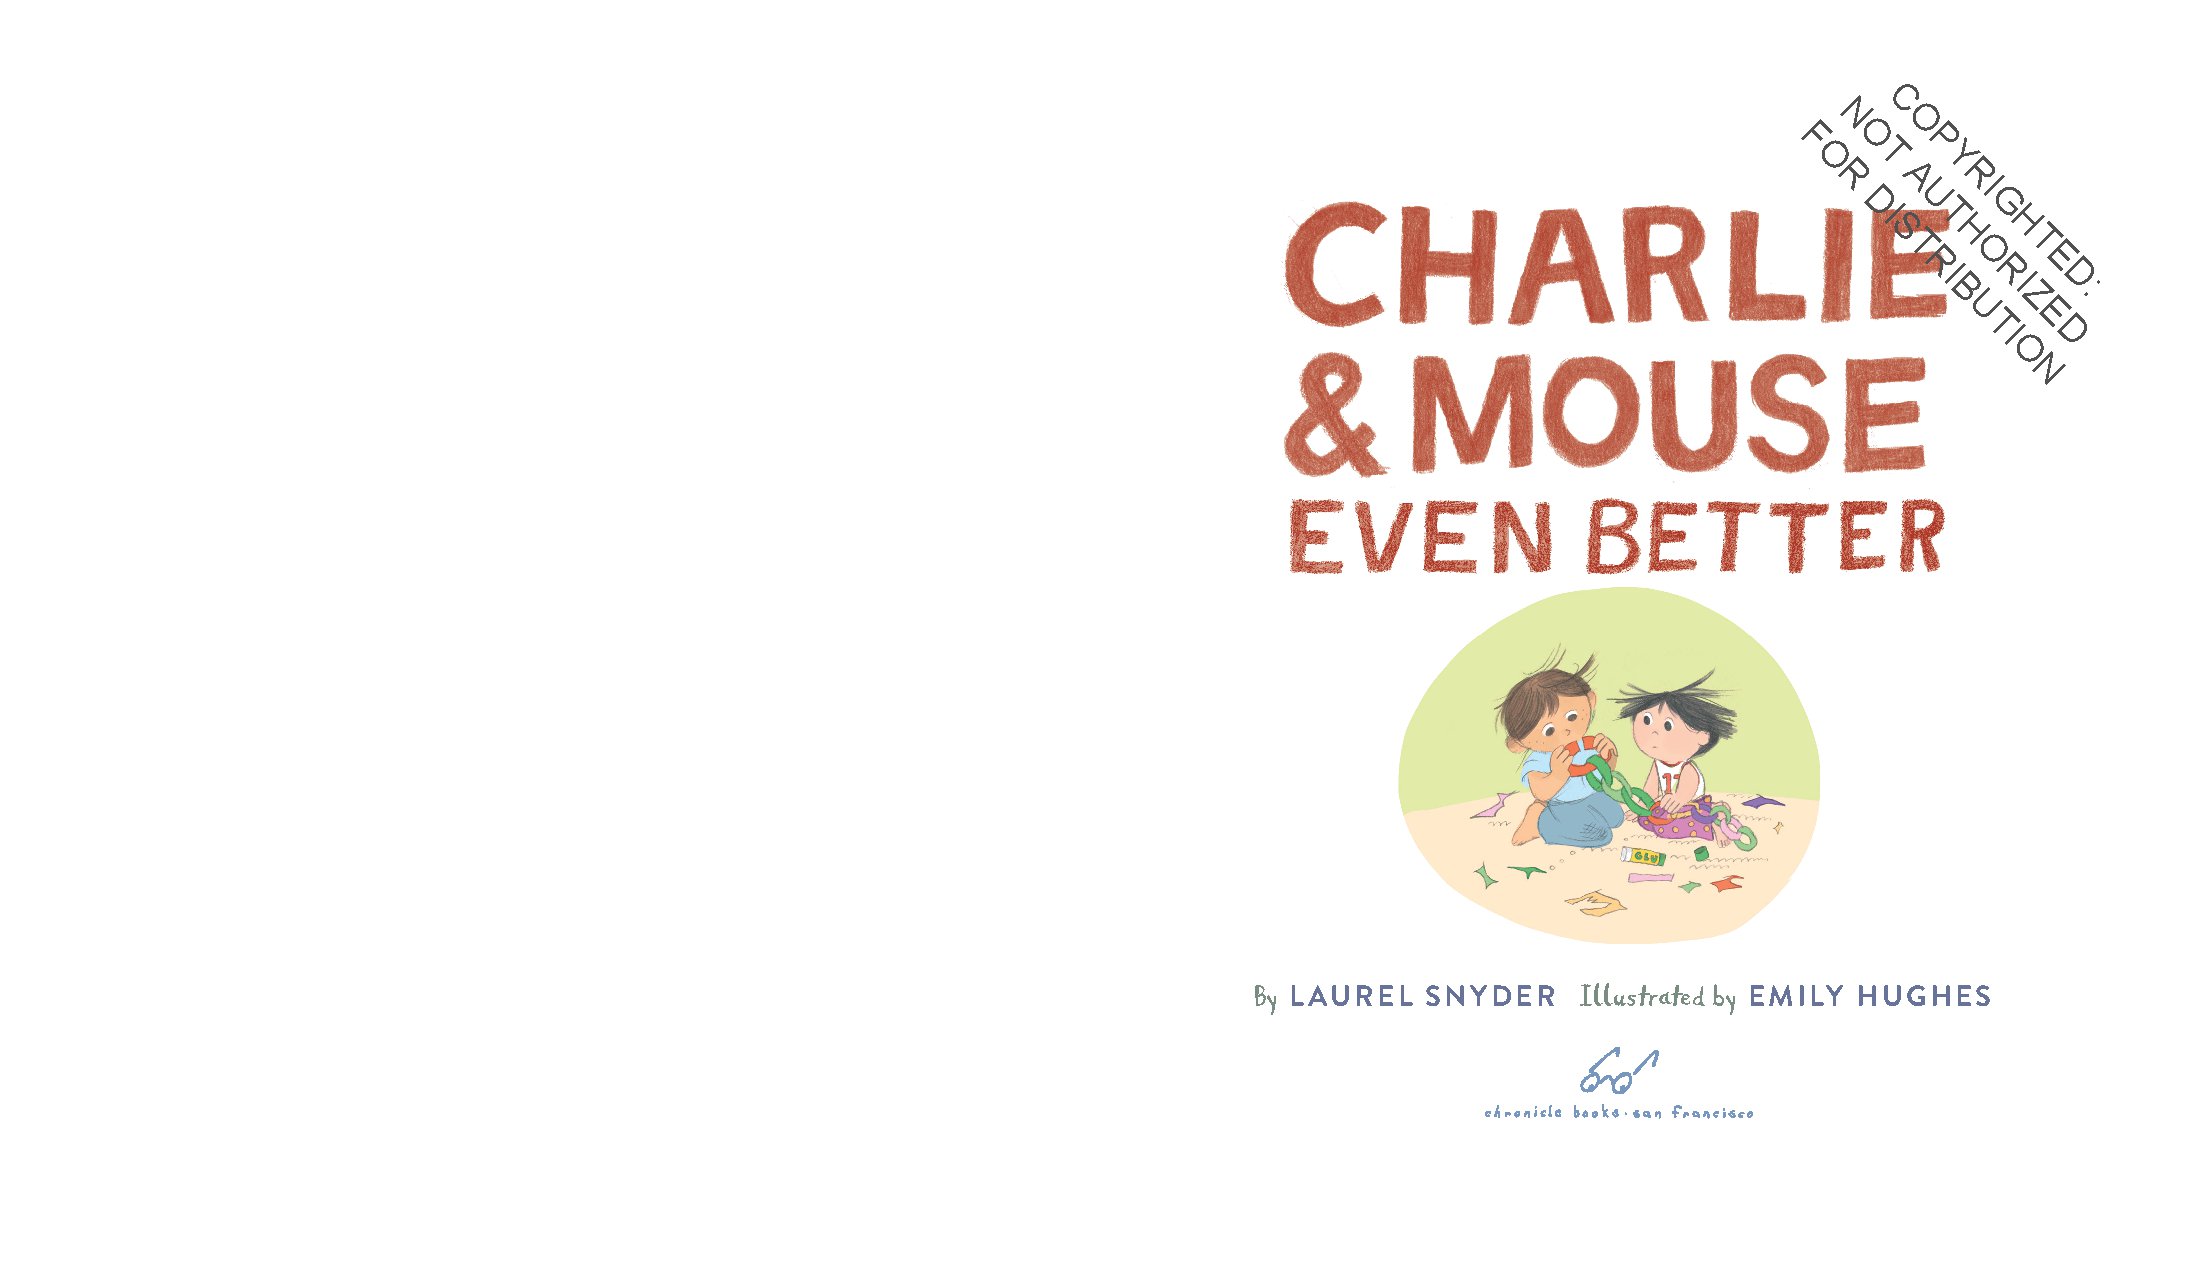 Charlie & Mouse Even Better: Book 3 in the Charlie & Mouse Series (Beginning Chapter Books, Beginning Chapter Book Series, Funny Books for Kids, Kids Book Series)